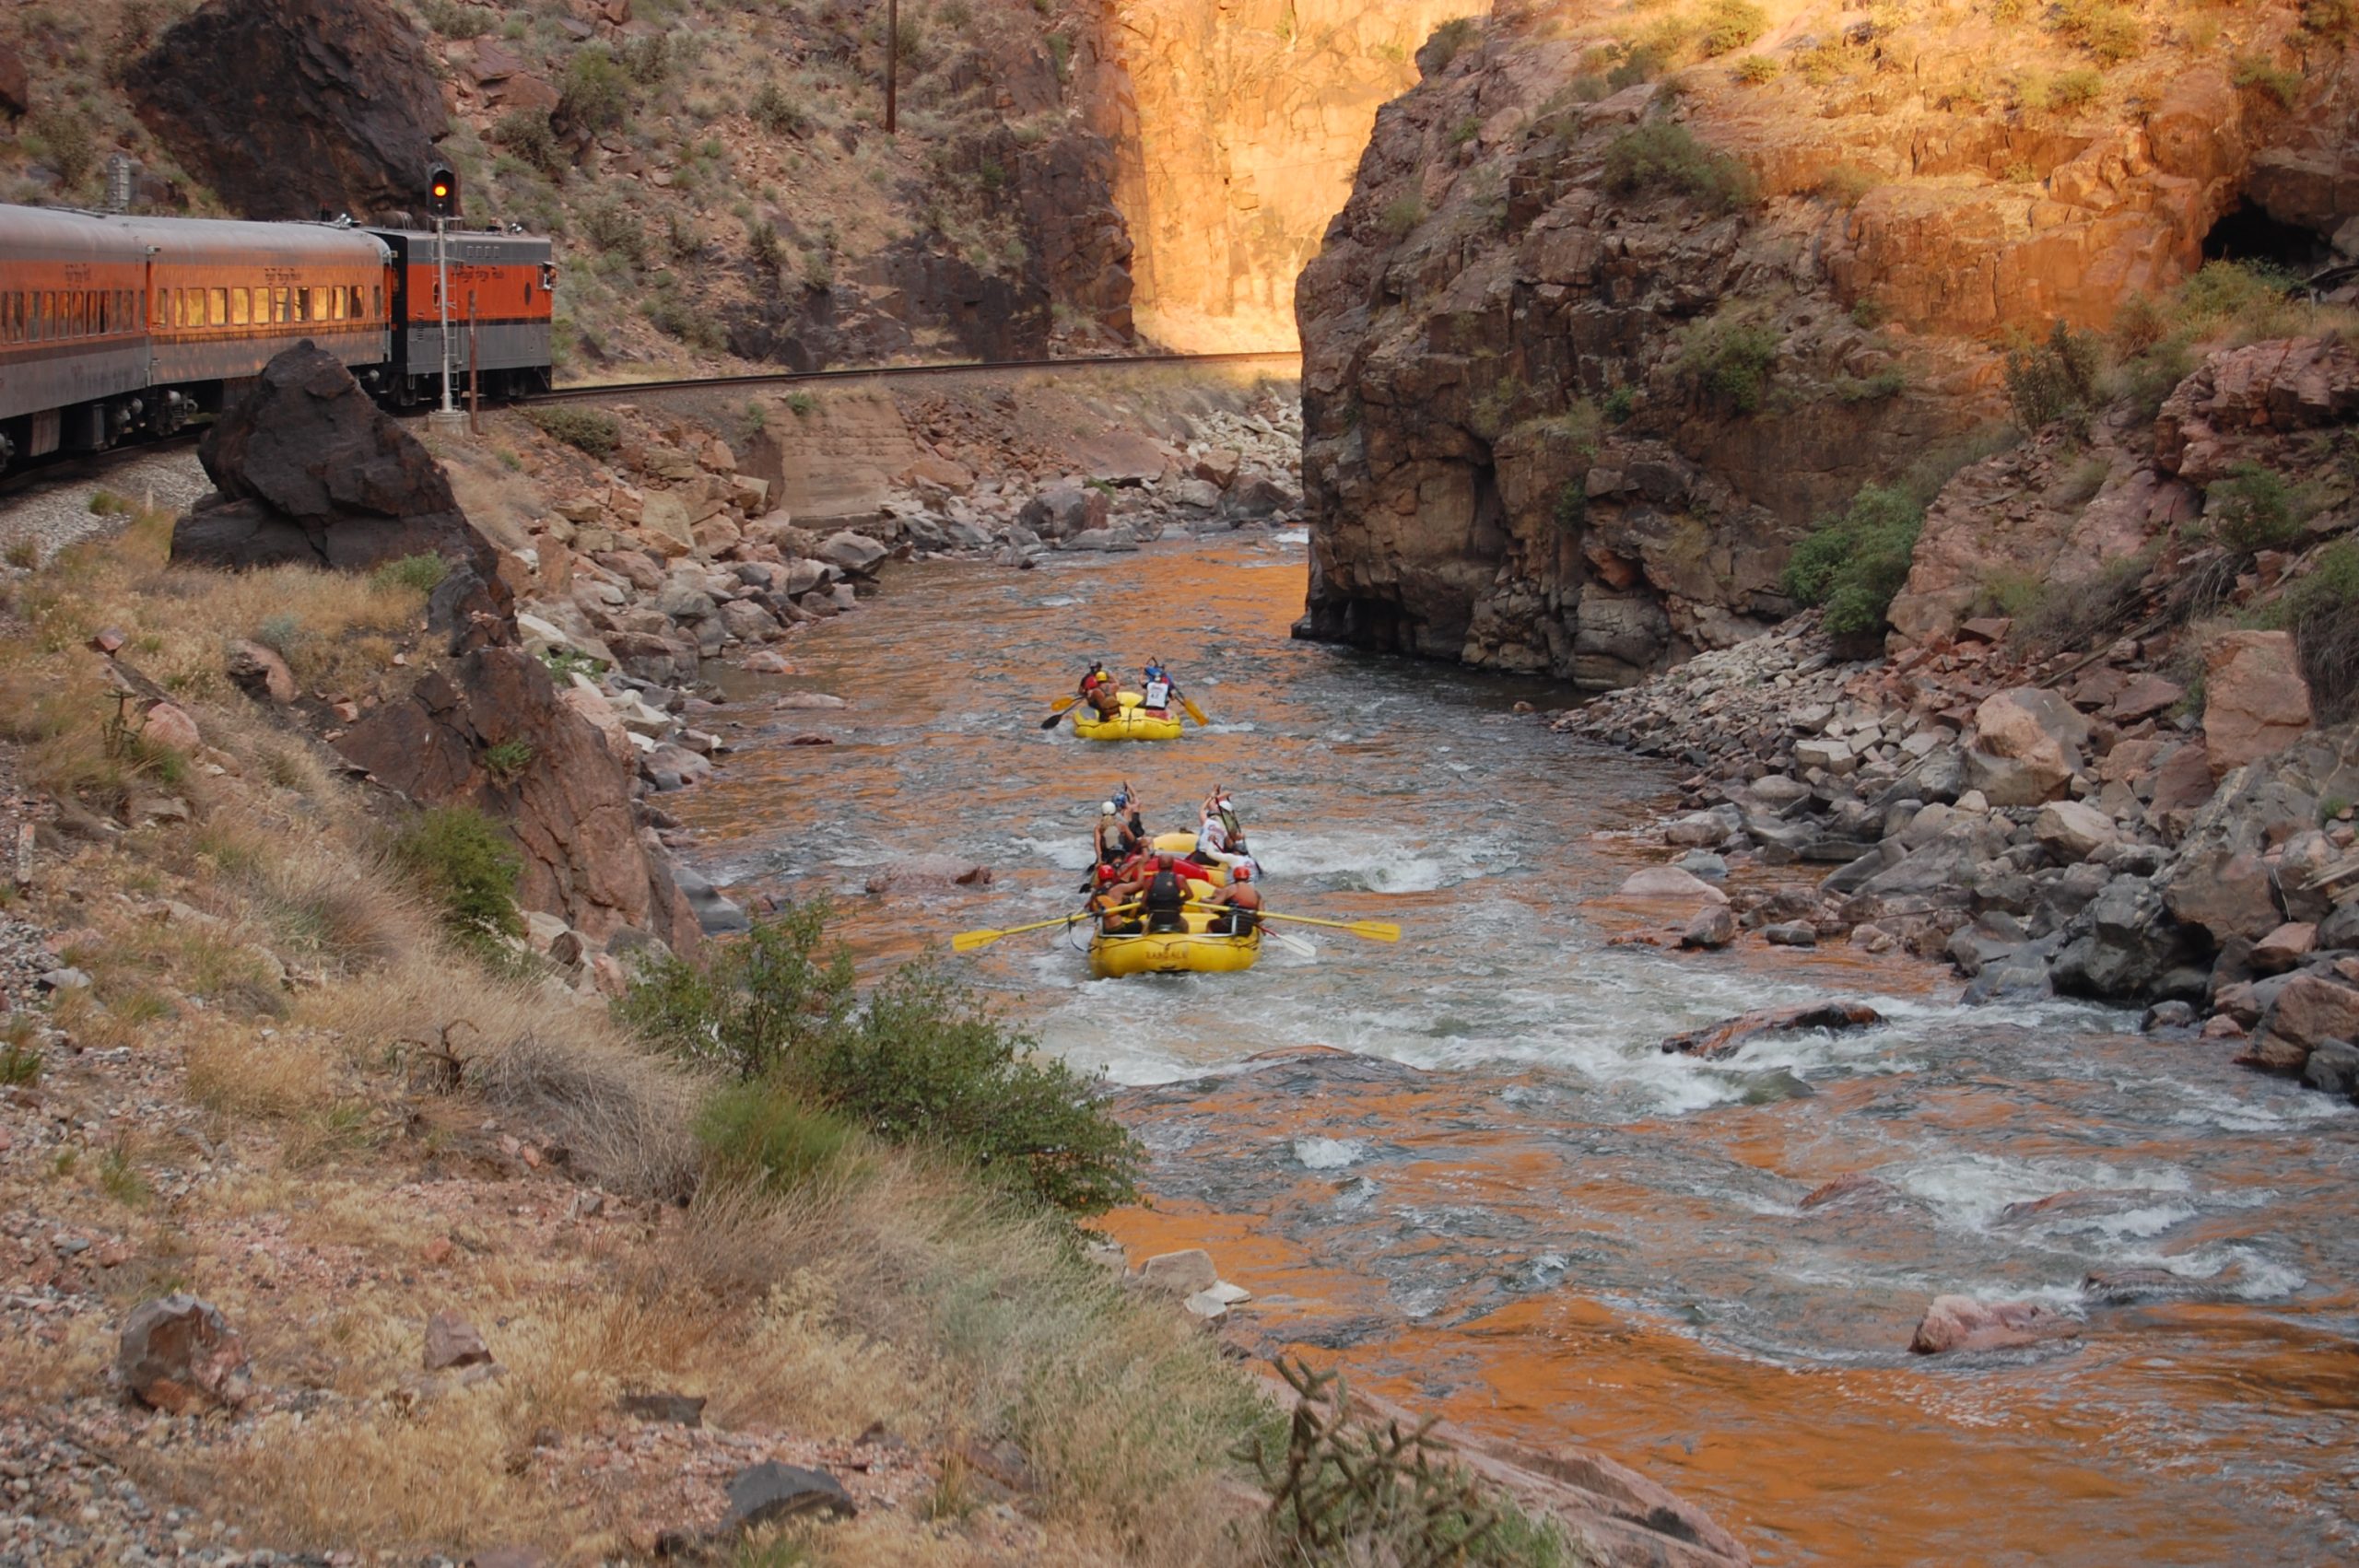 Outdoor Activities in the Royal Gorge Region